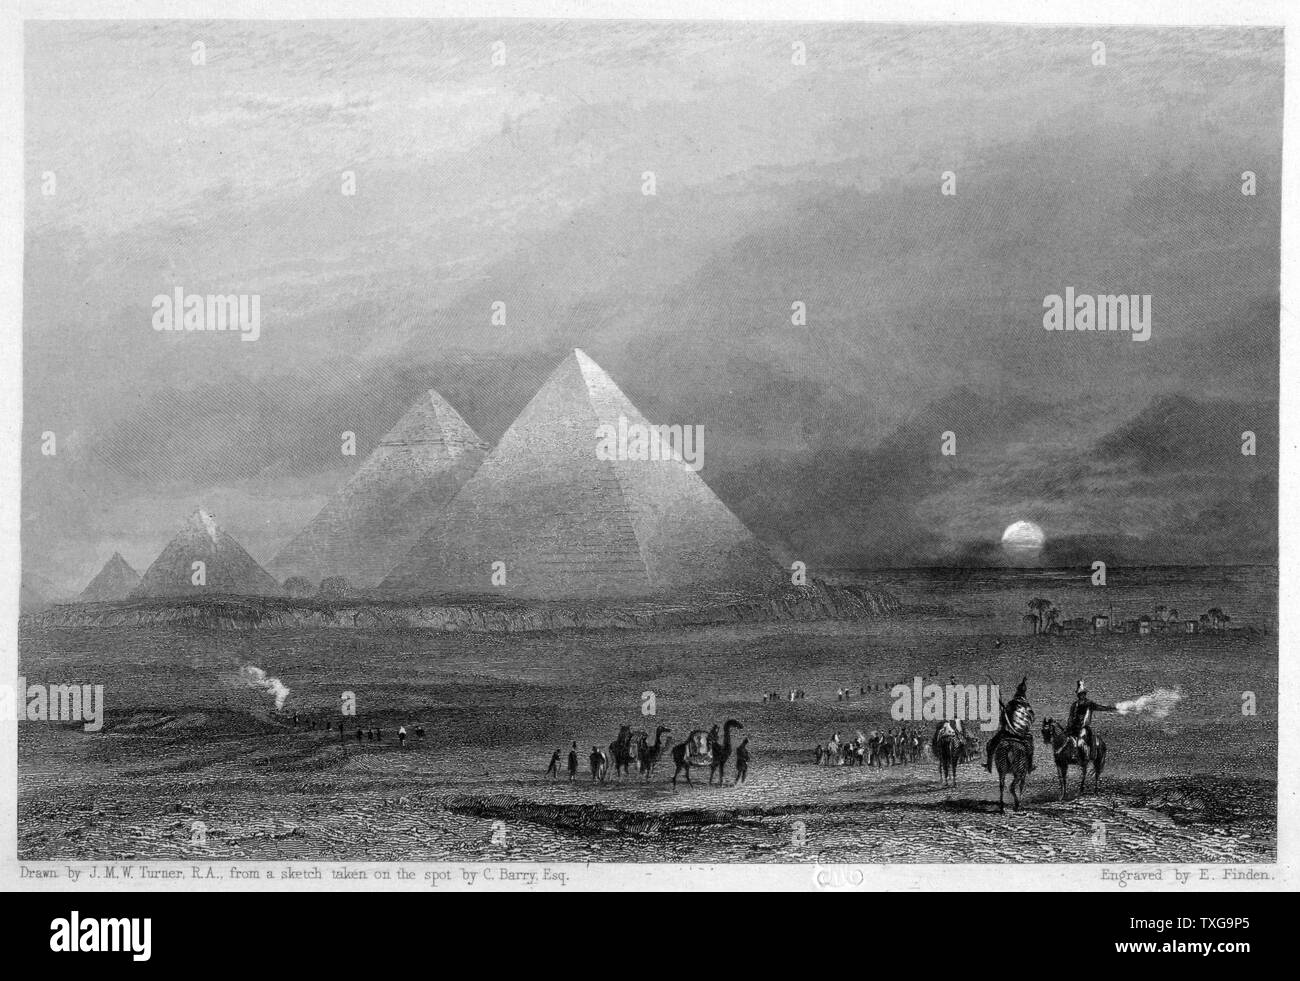 JMW Turner British school The Pyramids  Engraving from a sketch of C. Barry Stock Photo